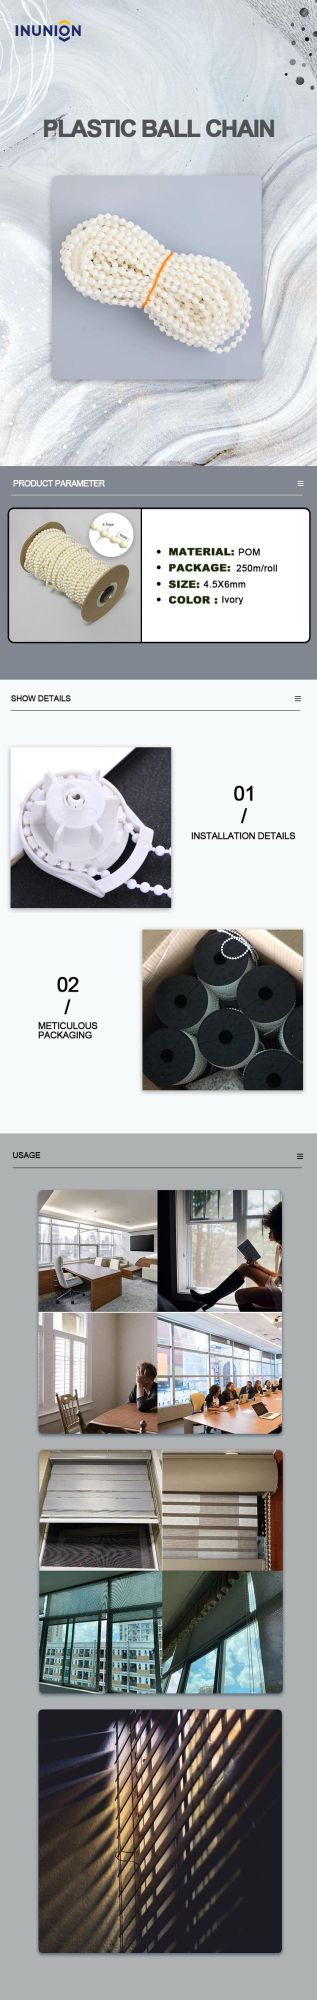 Plastic 4.5mm Roller Blinds Chain Weight Metal Ball Chain Blinds for Roller Blinds Metal Ball Chain.